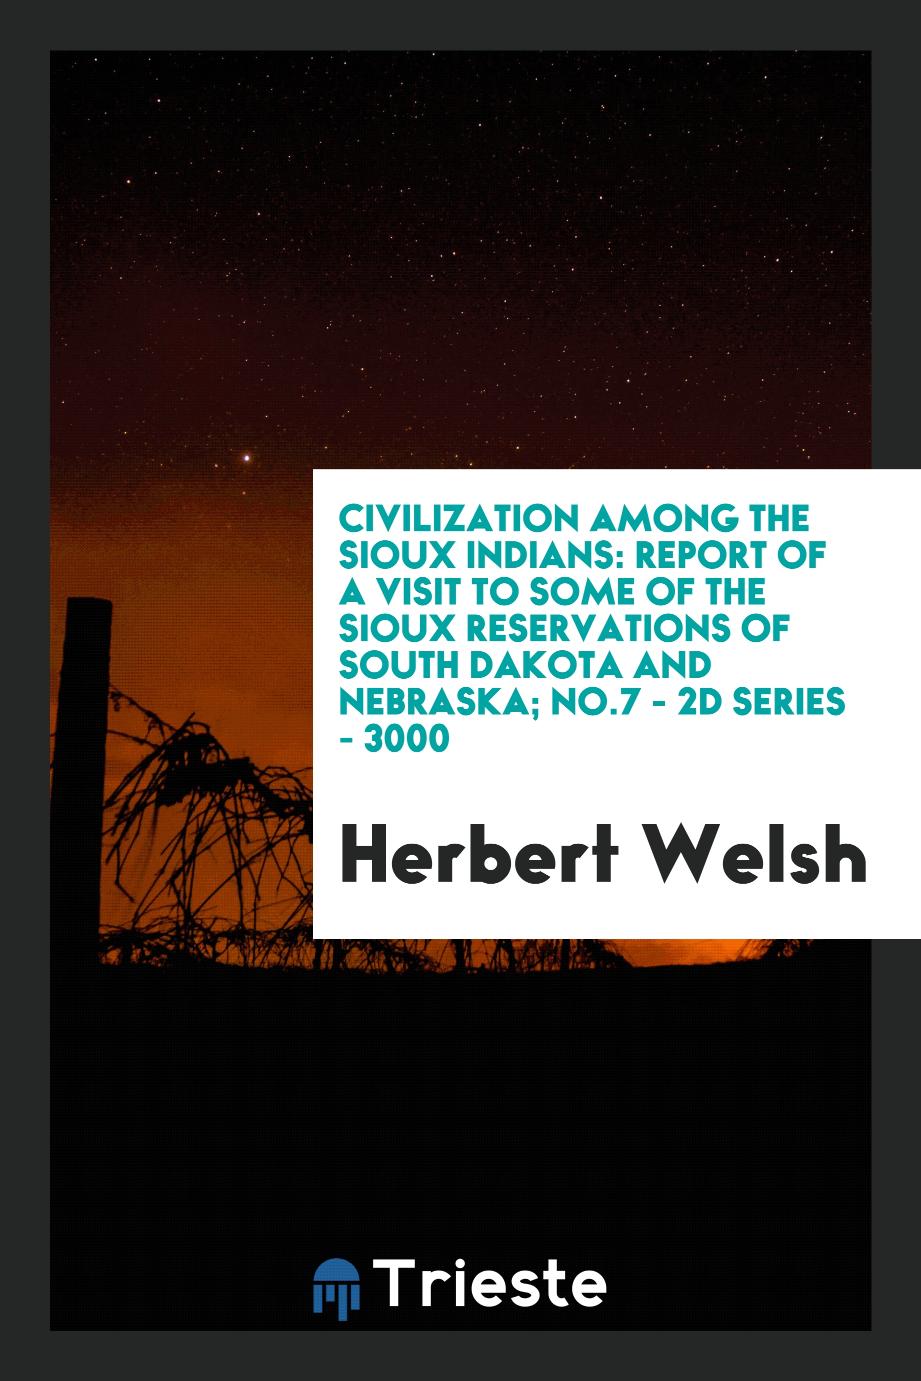 Civilization among the Sioux Indians: report of a visit to some of the Sioux Reservations of South Dakota and Nebraska; No.7 - 2D Series - 3000